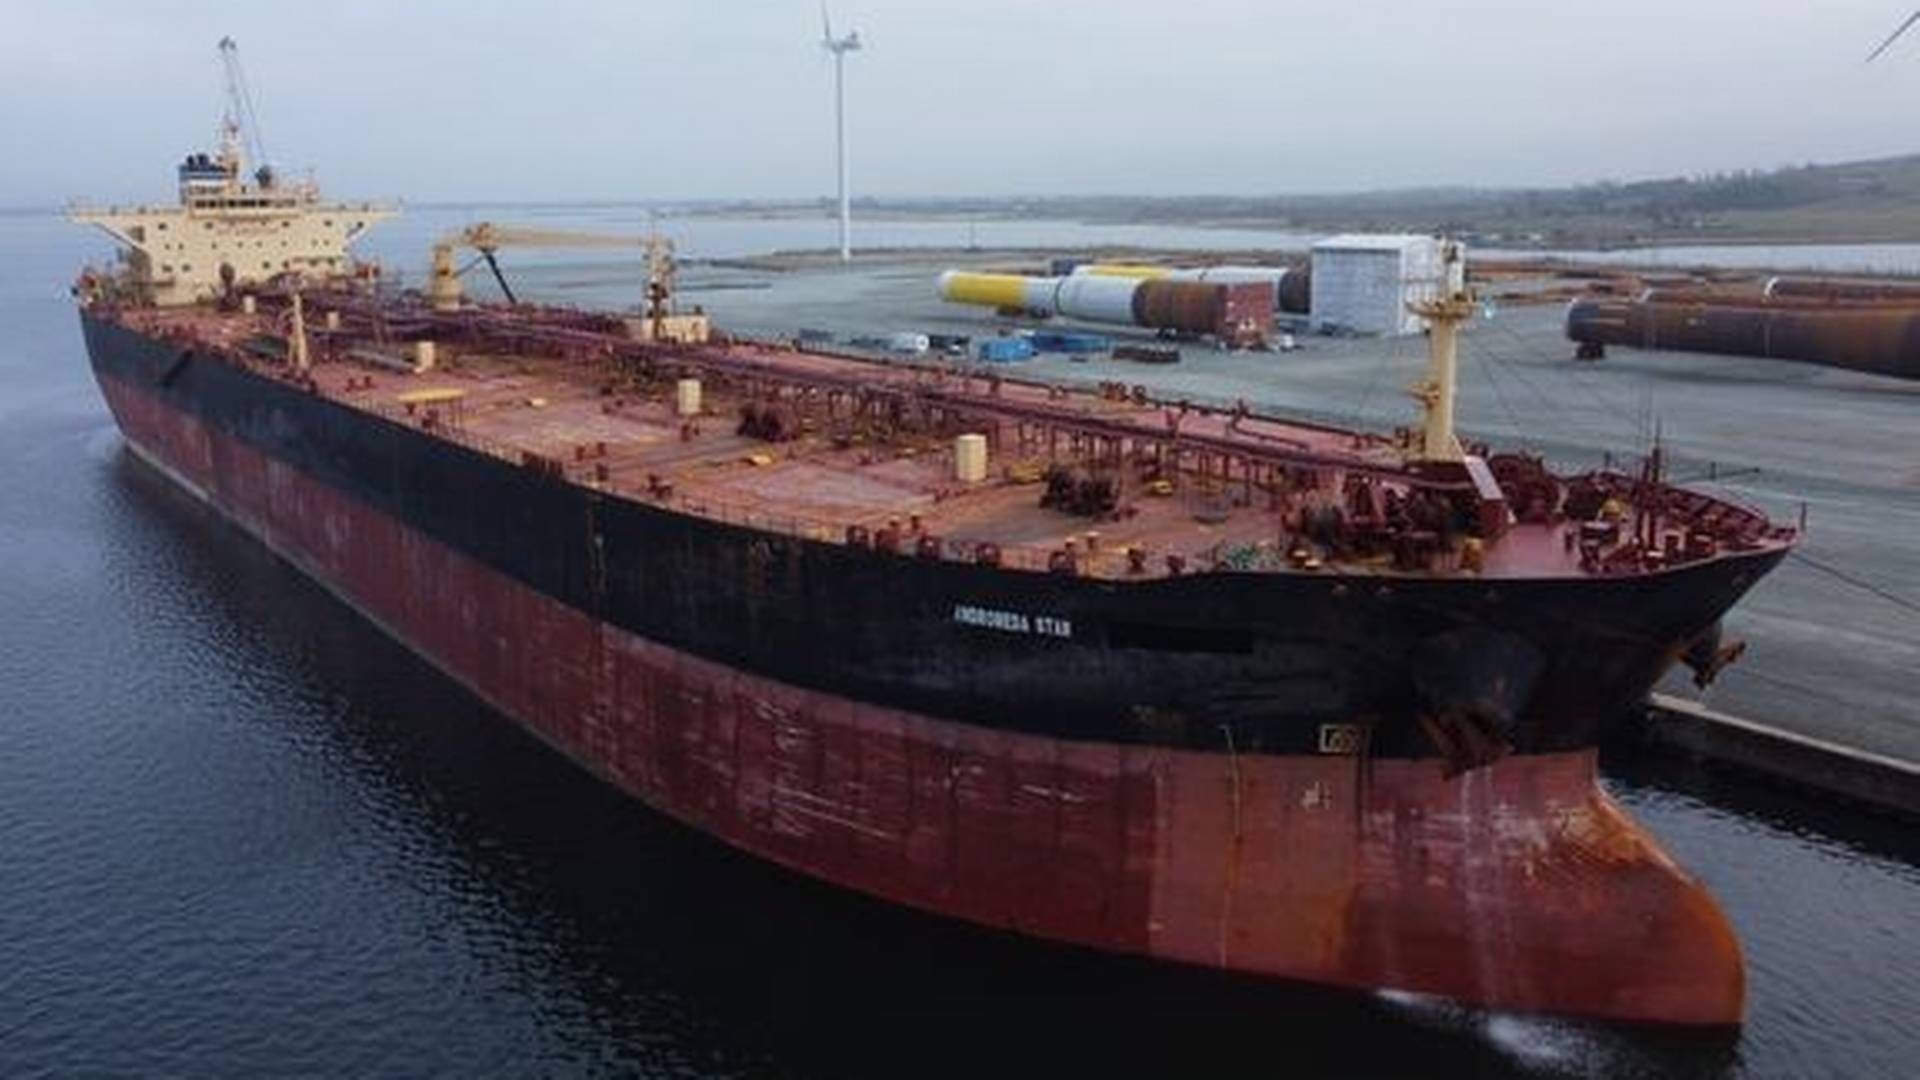 ”Worn-out and rusty oil tankers in Danish waters must be stopped immediately and before a serious accident occurs. Hope is not a strategy,” wrote Greenpeace in a statement accompanying this photo of the vessel Andromeda Star. | Photo: Greenpeace